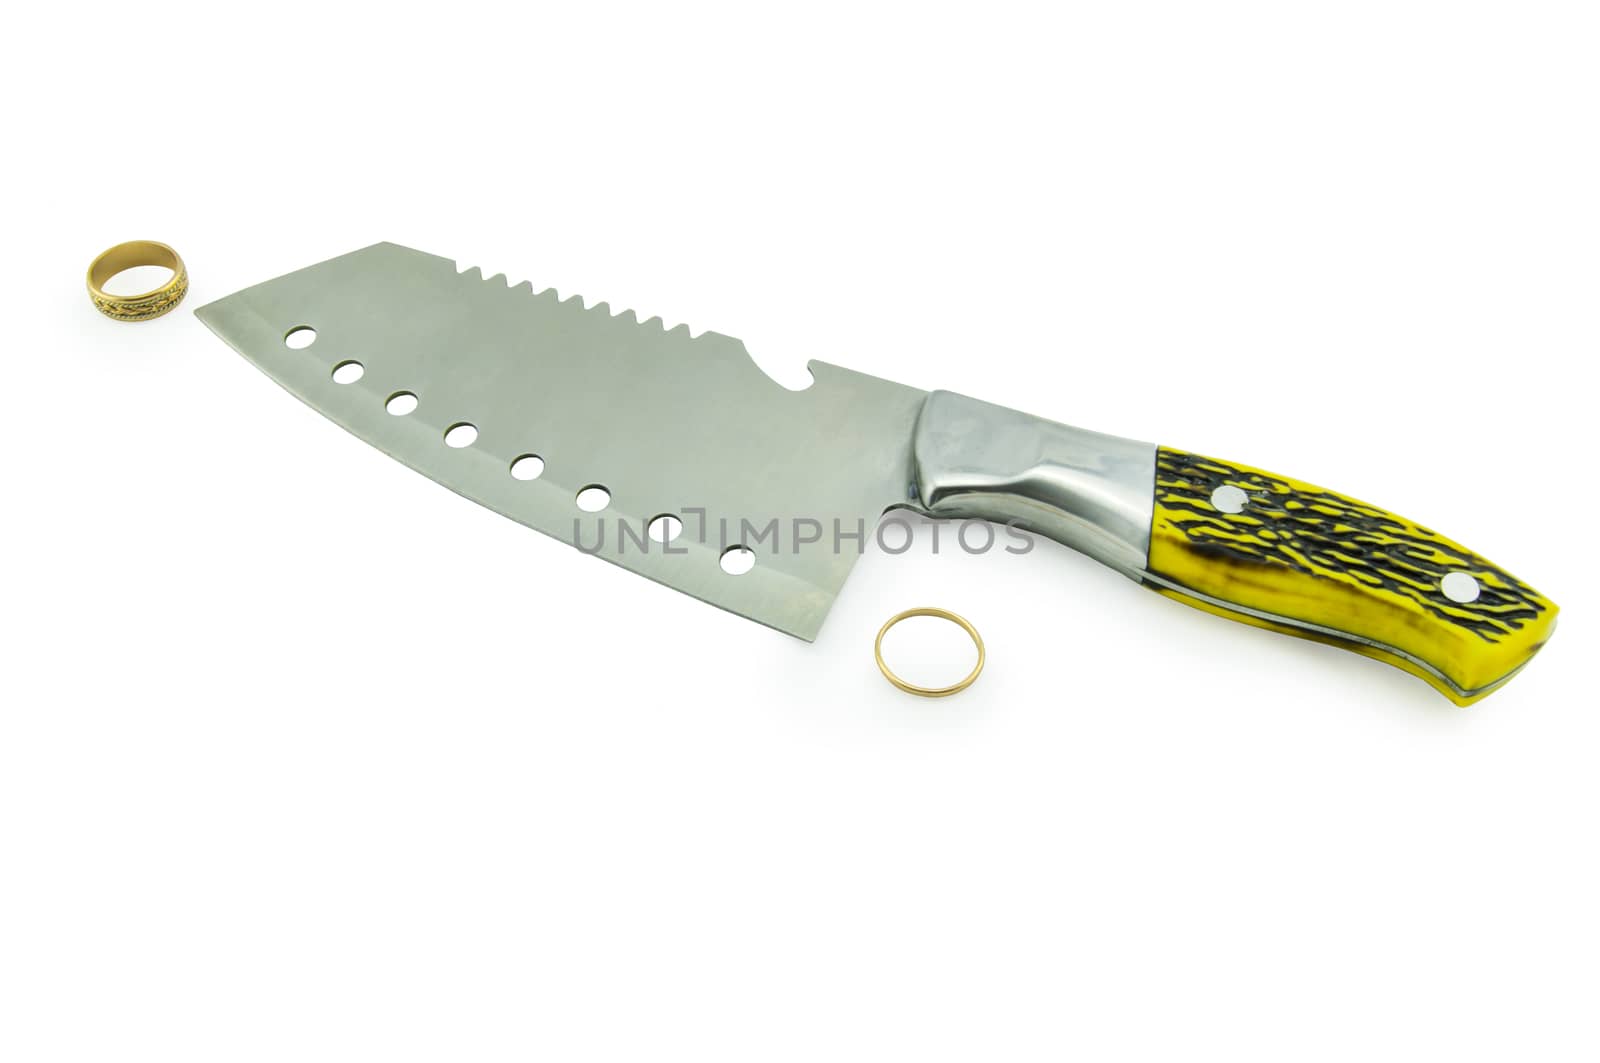 Meat cleaver knife isolated on white background. For your commercial and editorial use.